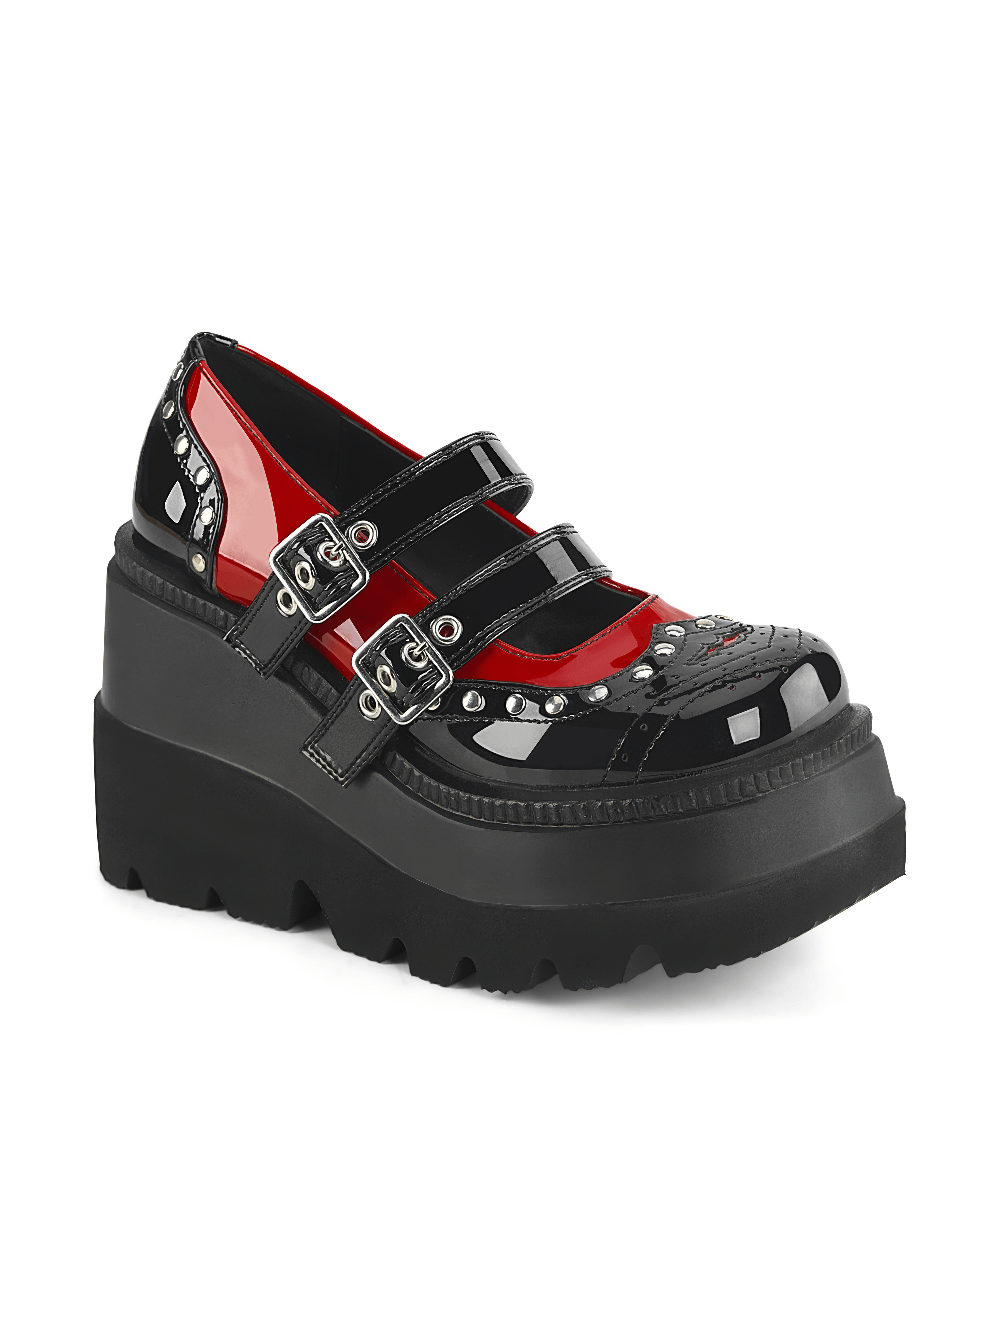 DEMONIA Black and Red Lolita Shoes with Studded Details